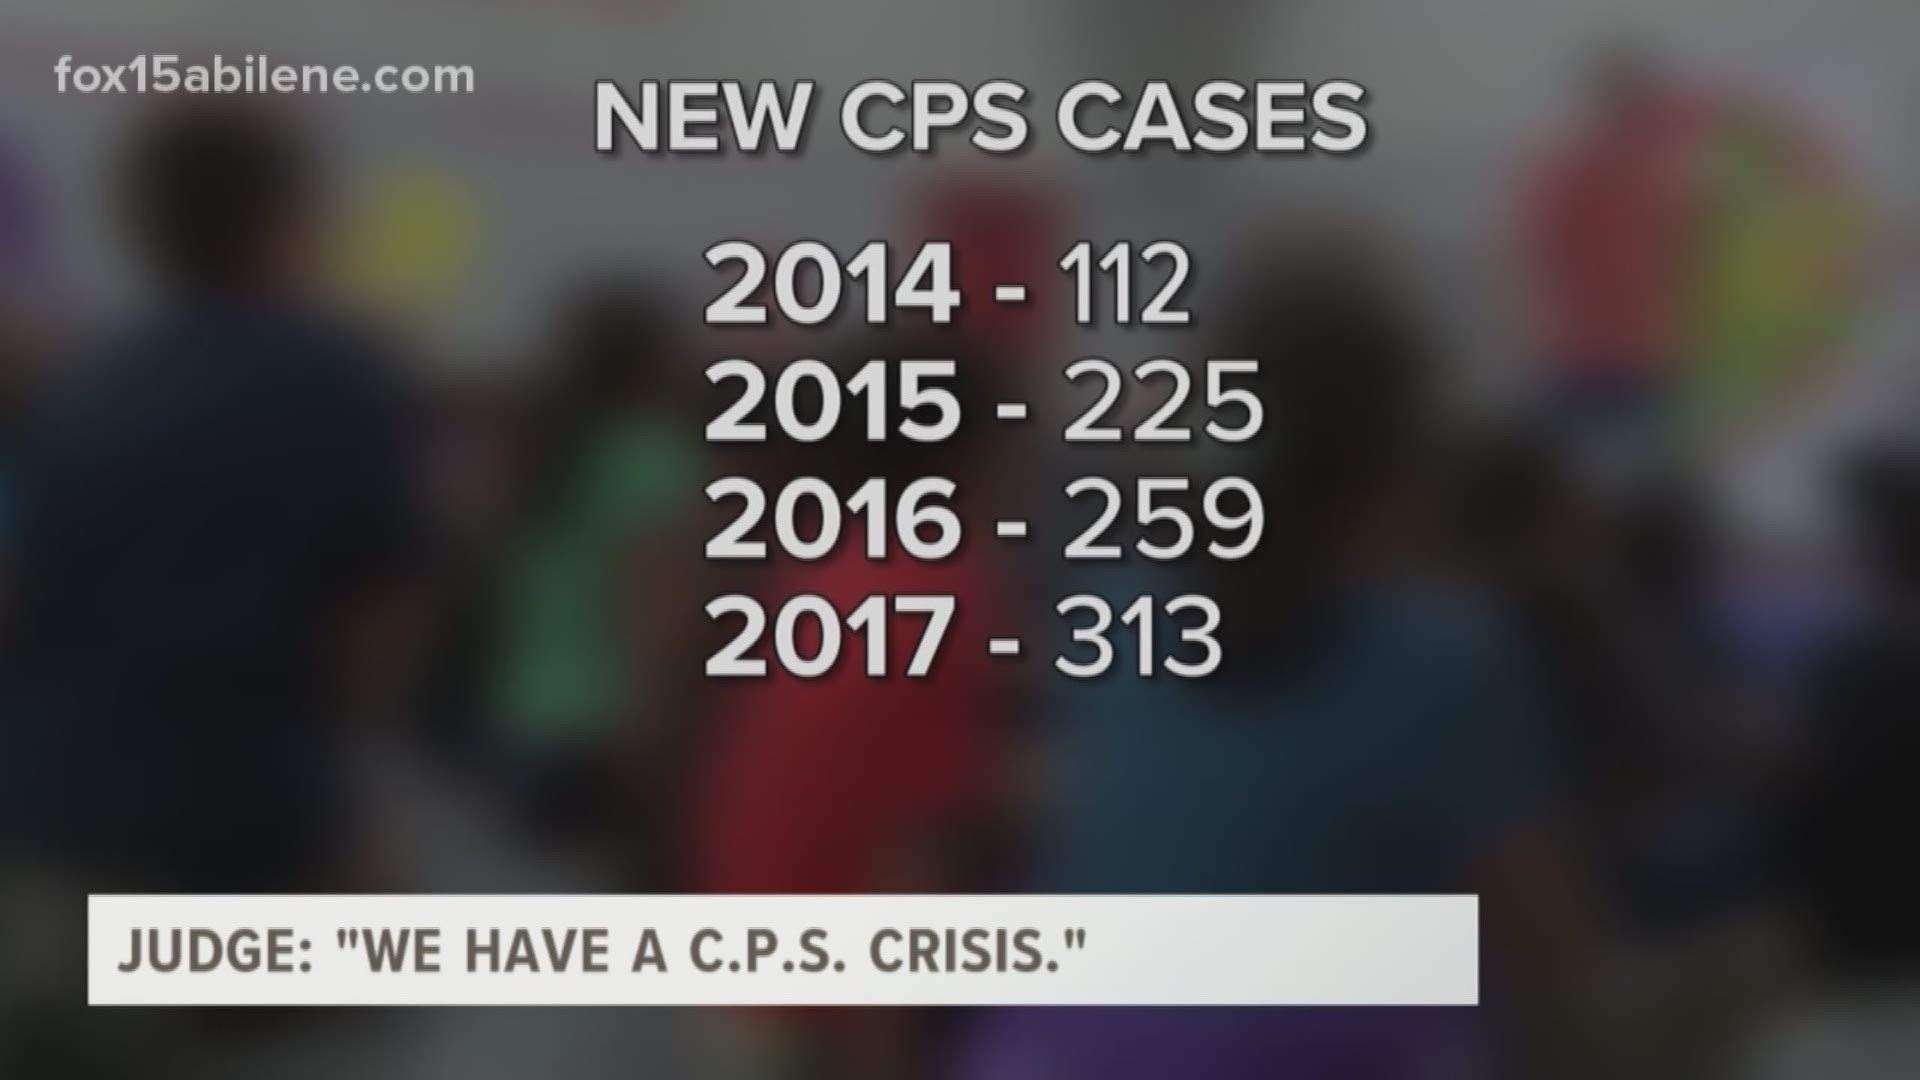 "We have a C.P.S. crisis in Taylor County."